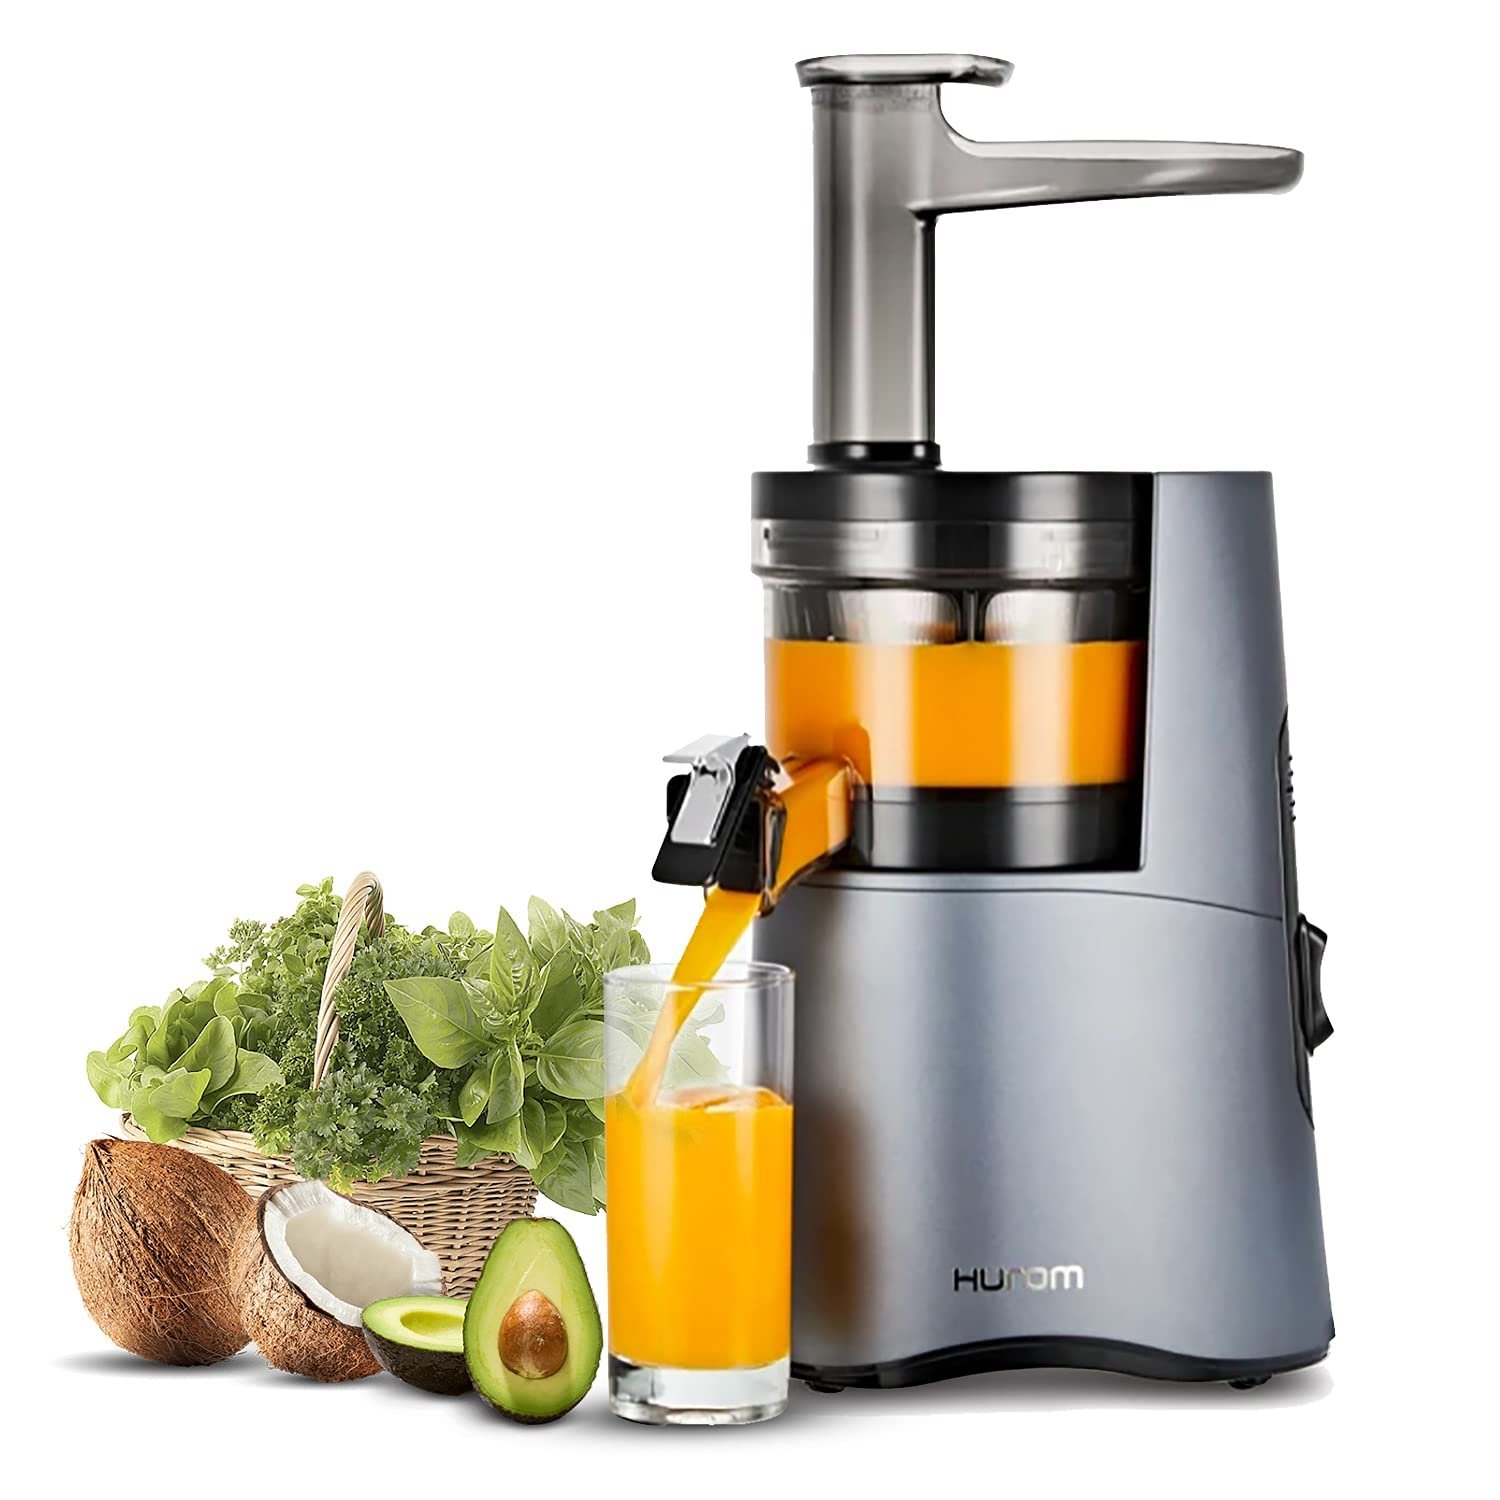 Hurom H-Aa Slow Cold Press Juicer Slow Squeeze Alpha Technology All-In-One Juicer Make Juice, Smoothies, Nut Milk, Sorbet. Easy To Clean Slow Juicer (Made In Korea), Midnight Blue, 150 Watts